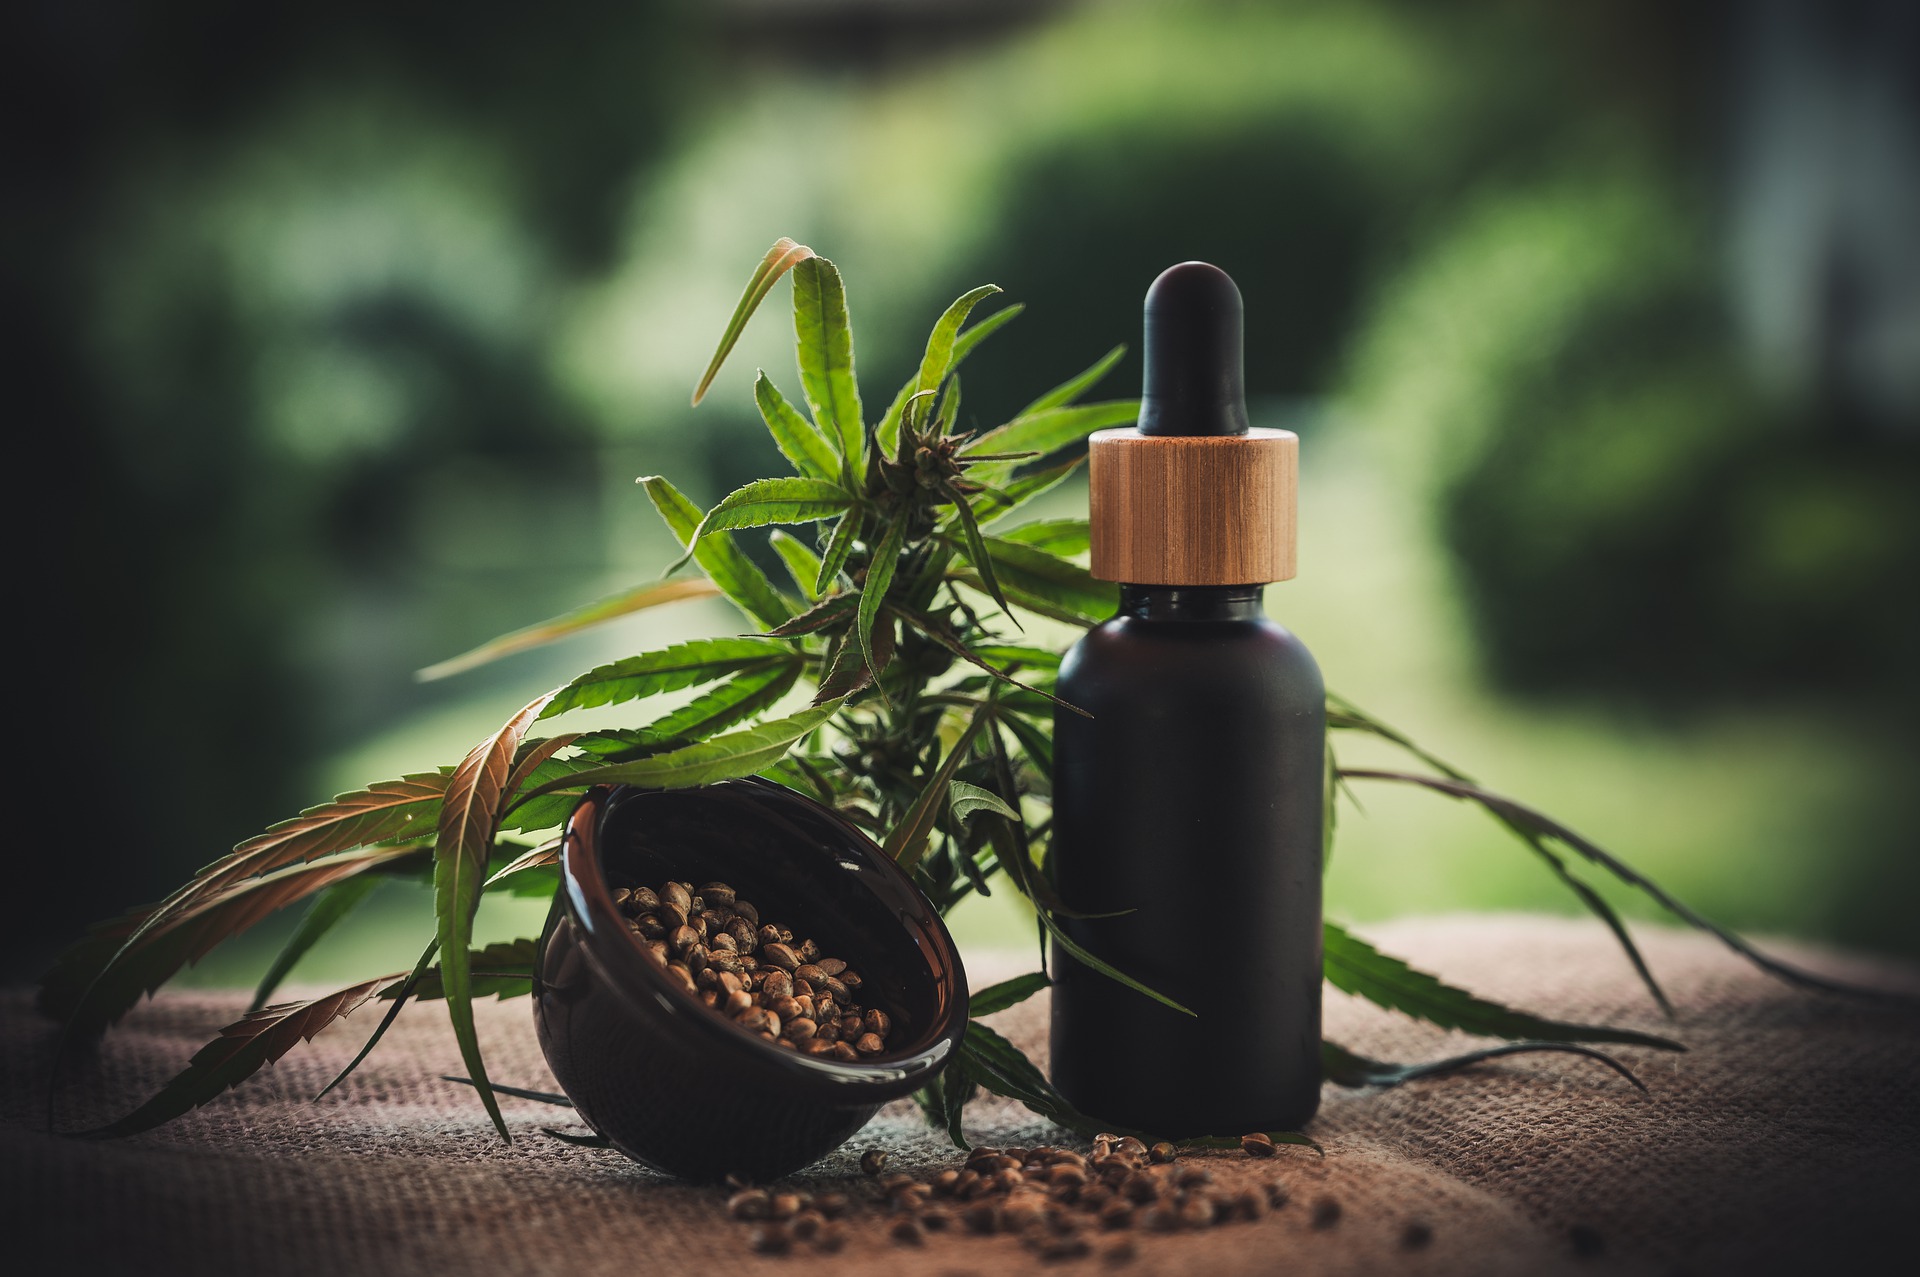 Polish skin care cosmetics with CBD. Which products deserve our attention?